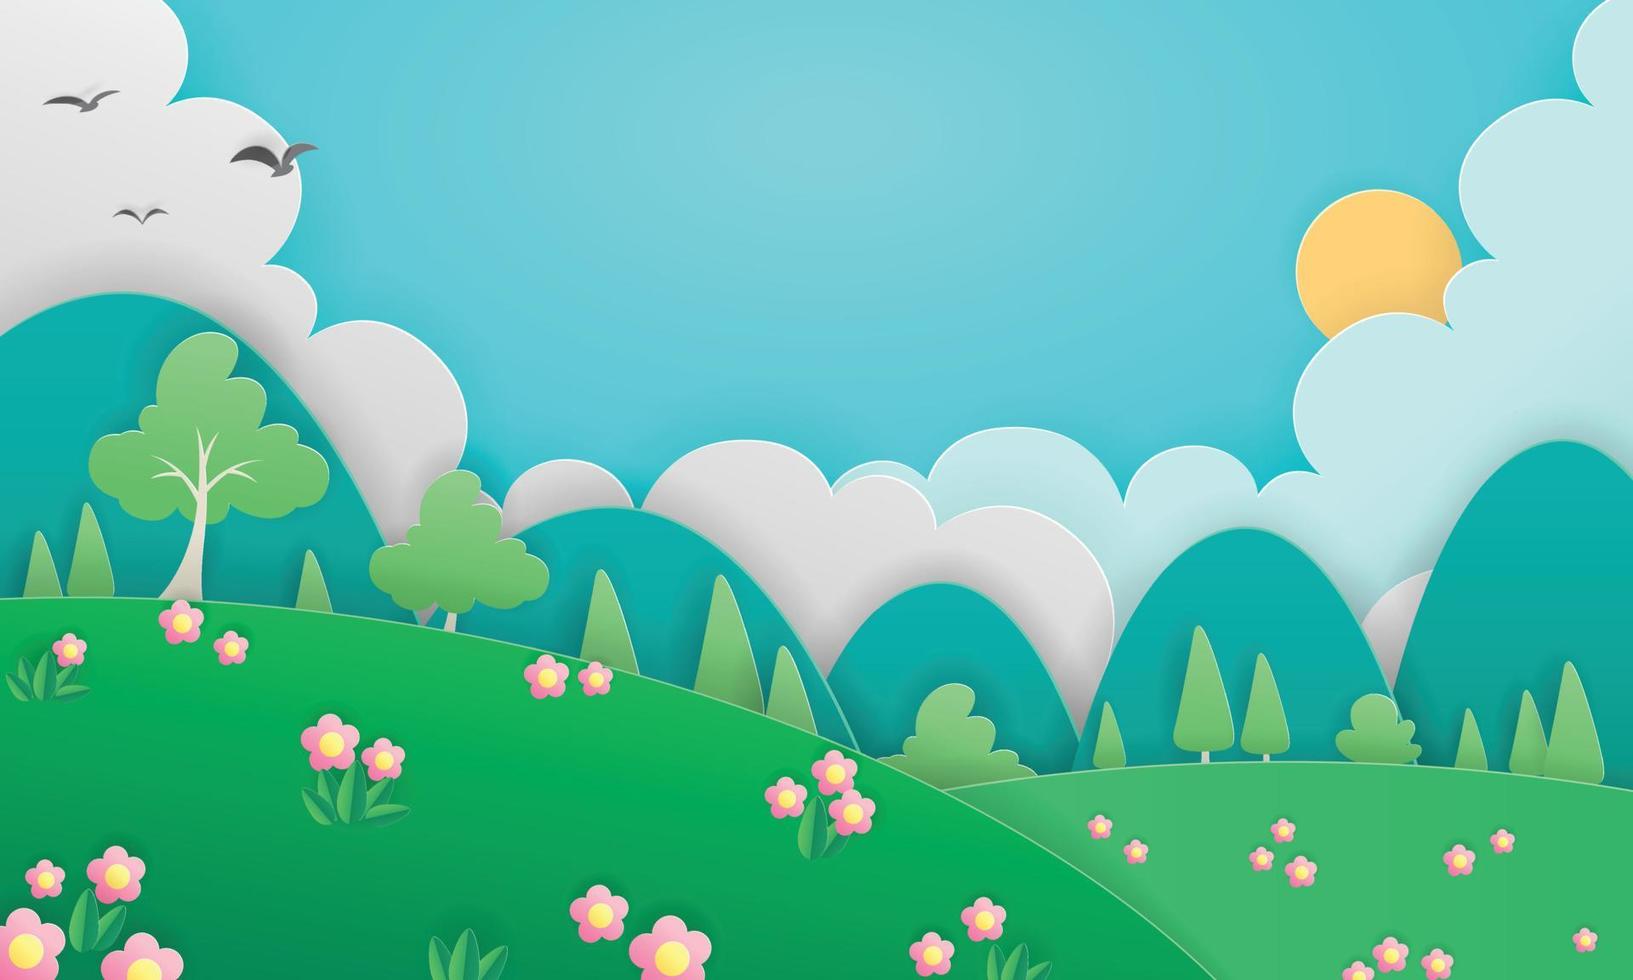 Paper-cut art style natural scenery paintings vector